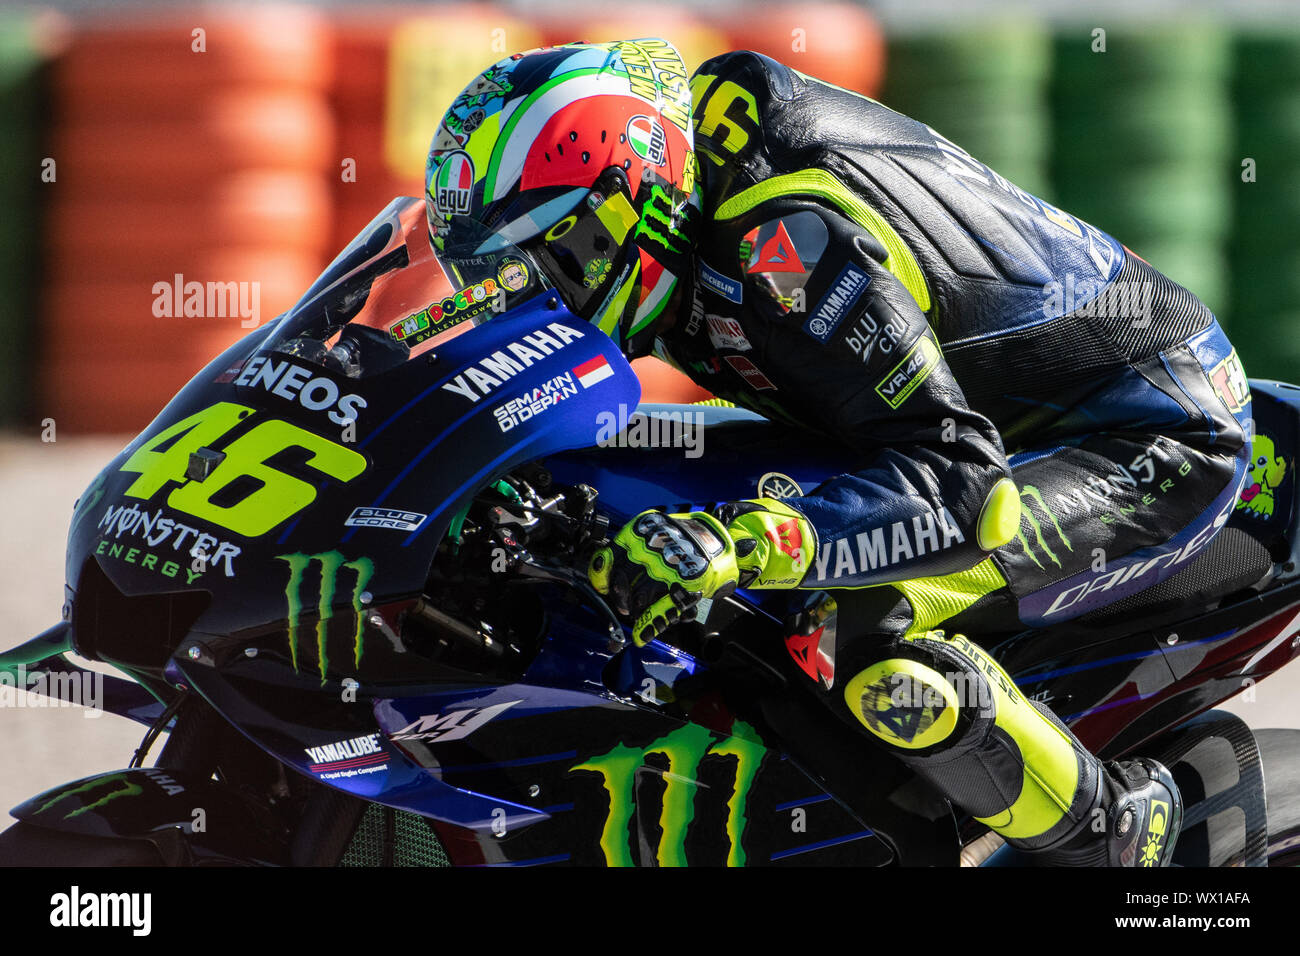 VALENTINO ROSSI, ITALIAN MOTOGP RIDER NUMBER 46 (WITH SPECIAL CELEBRATIVE  HELMET FOR MISANO) FOR YAMAHA MONSTER TEAM during Saturday Free Practice  Stock Photo - Alamy